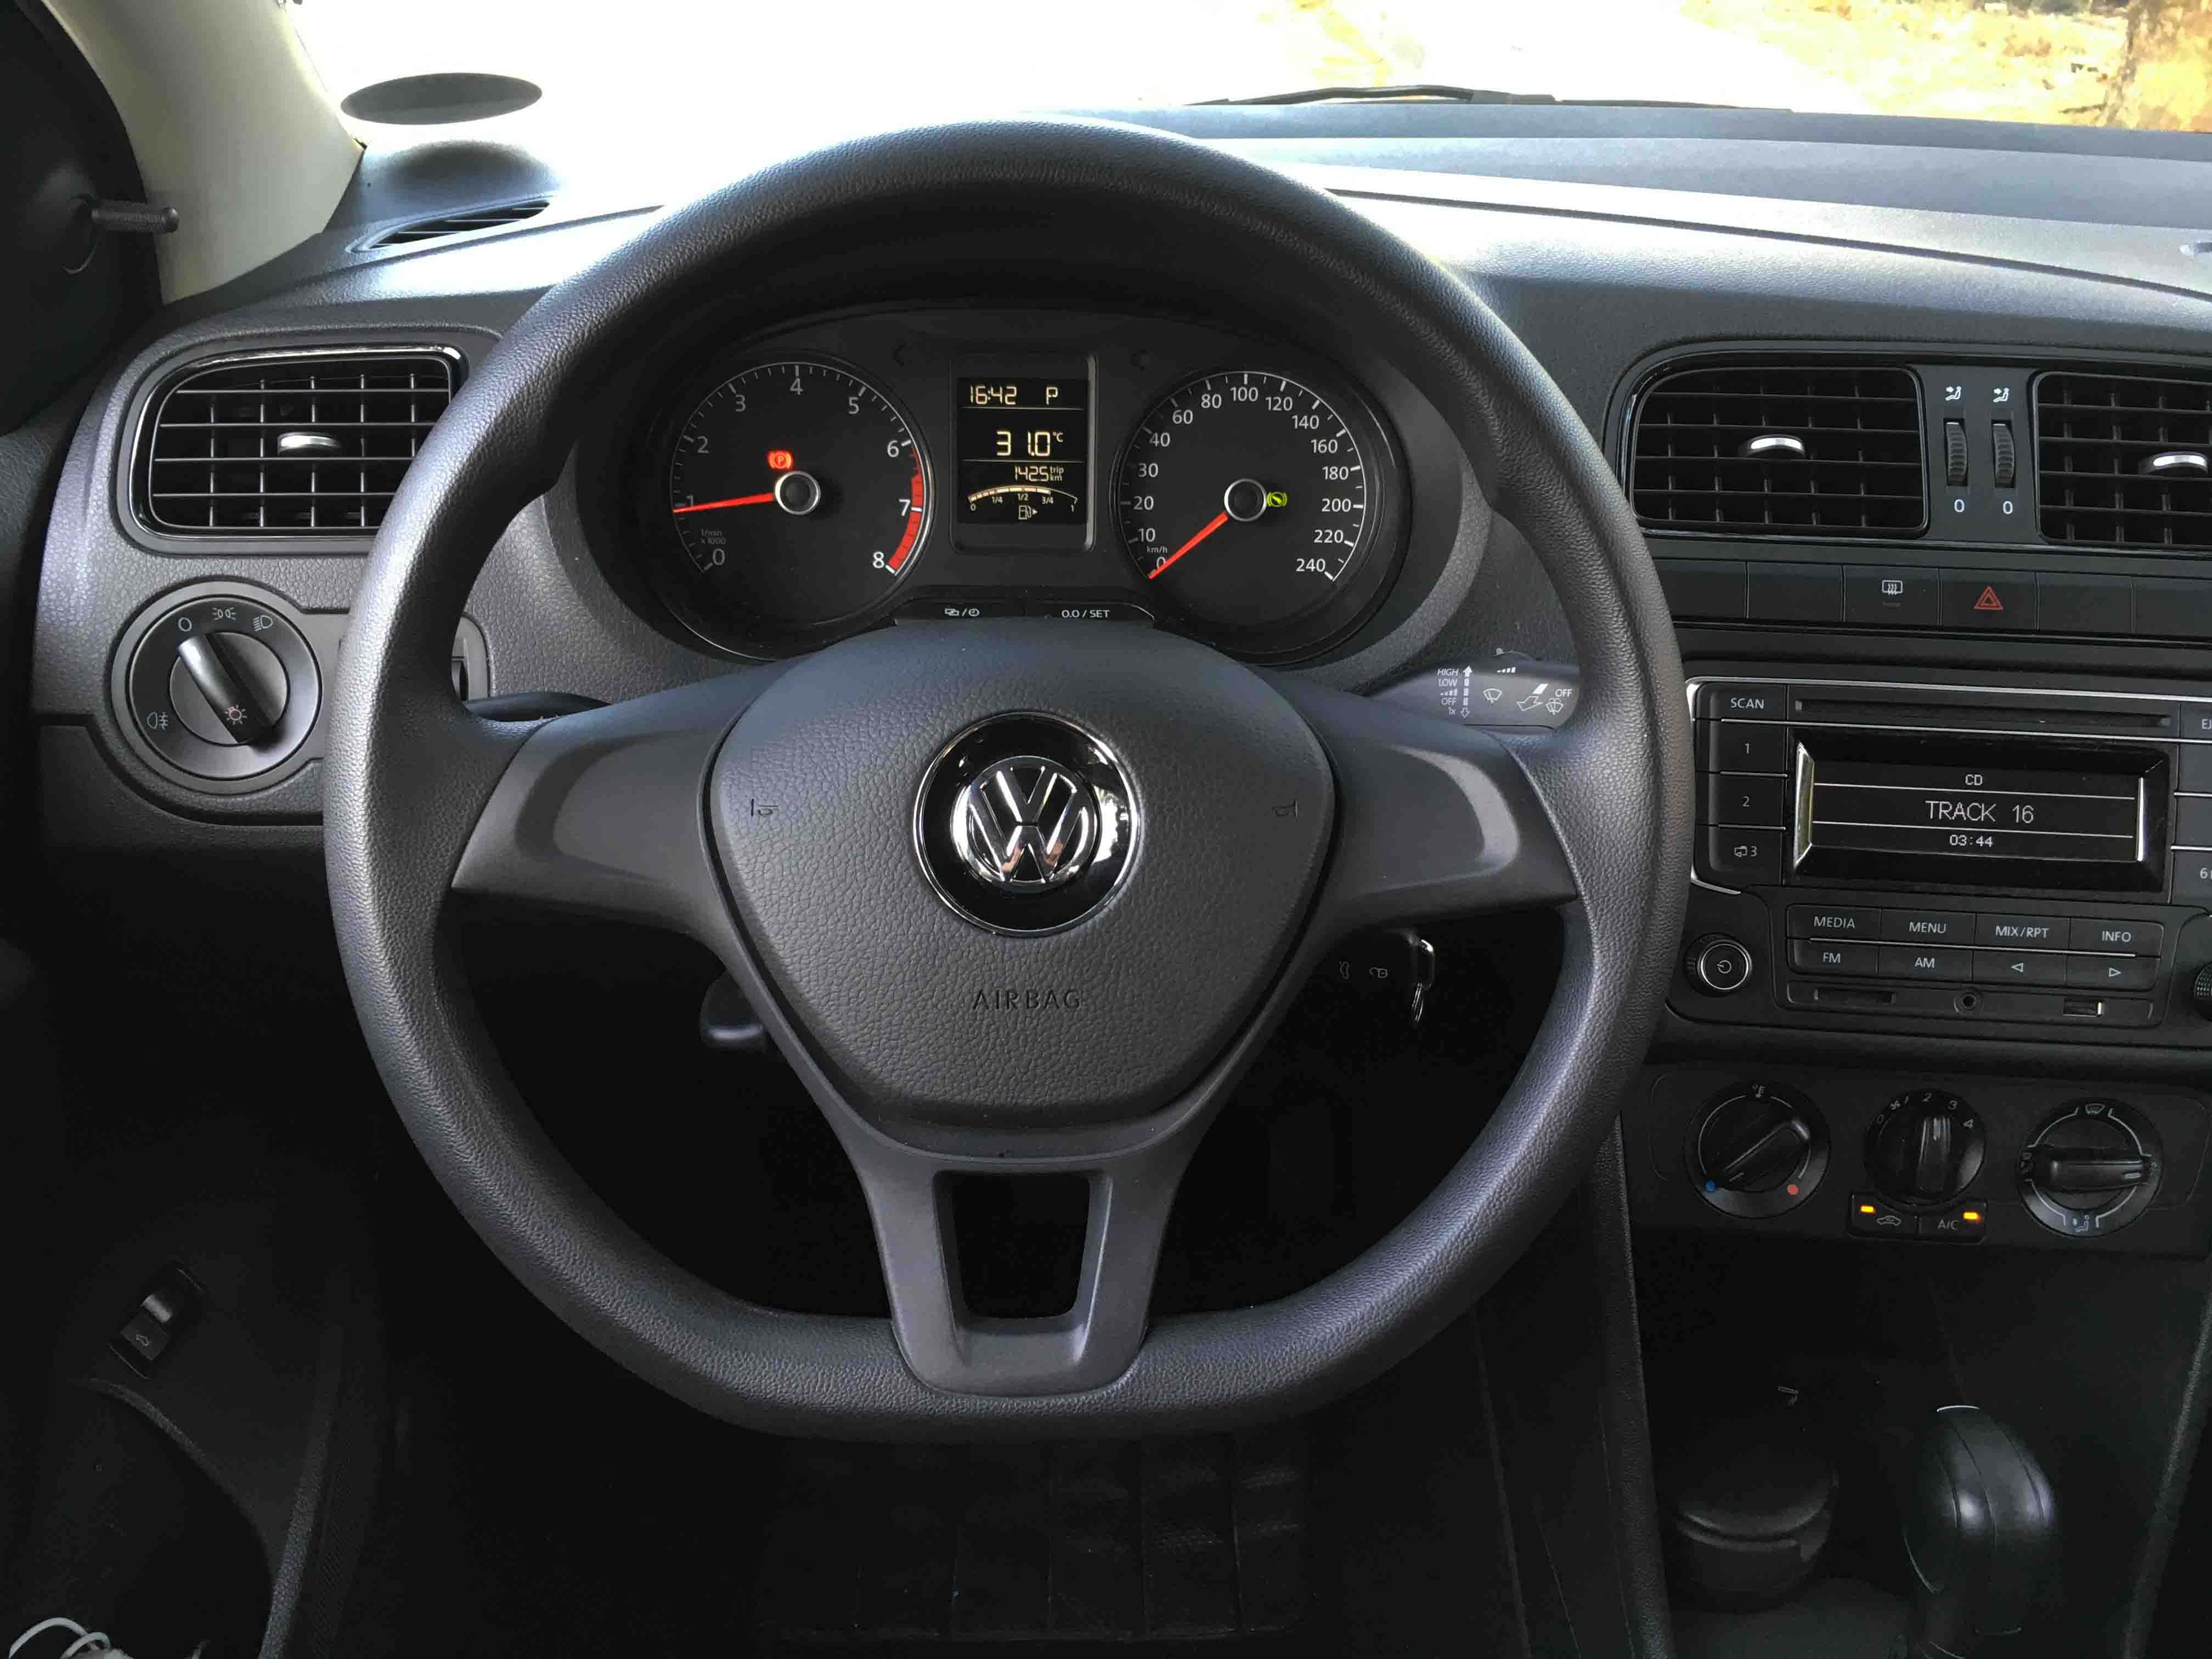 Driving the Volkswagen Polo